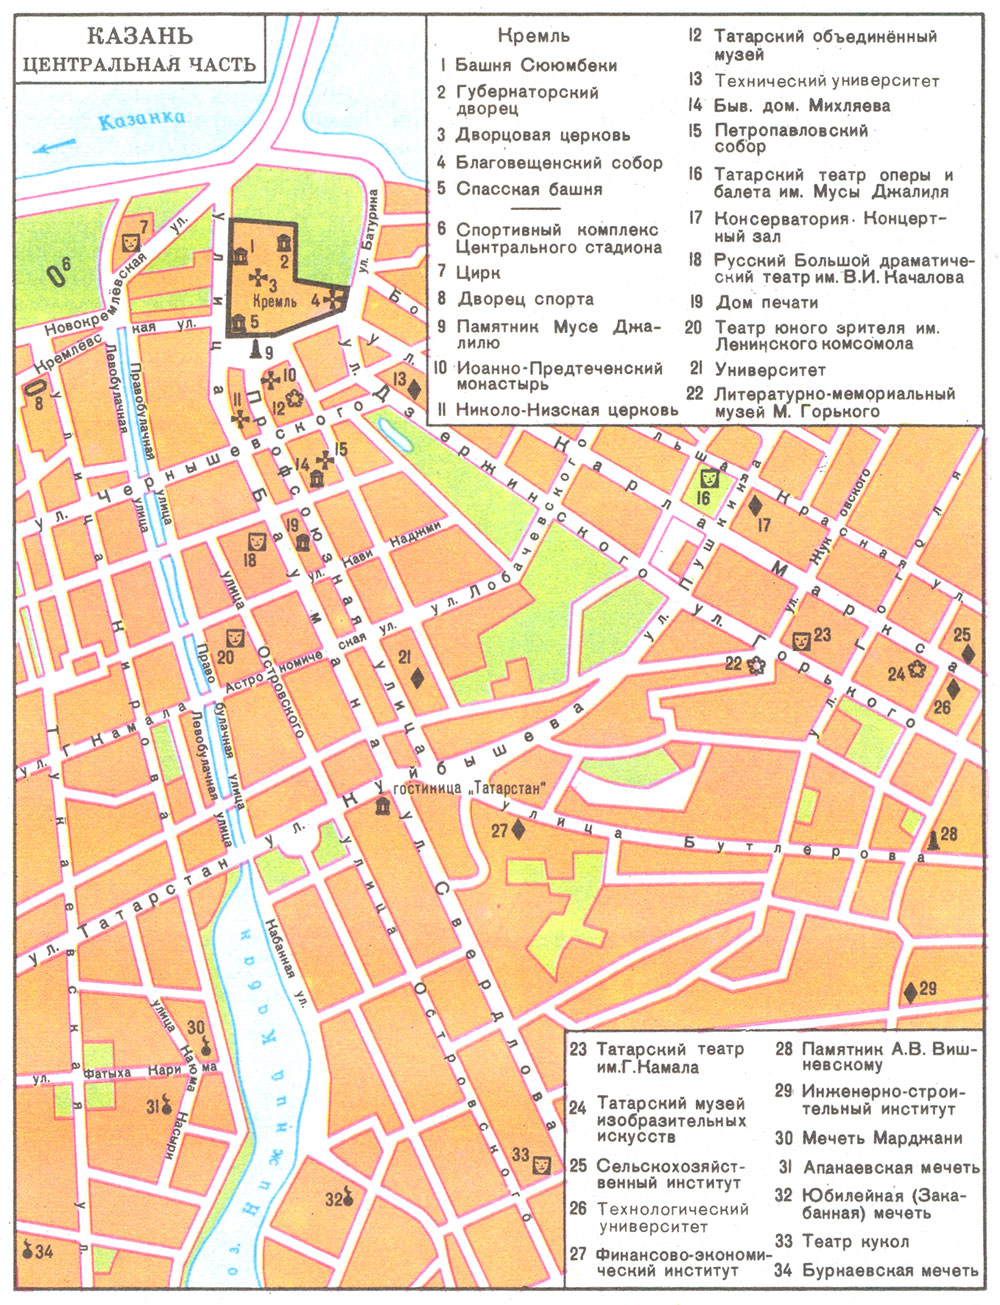 Map of central part of Kazan